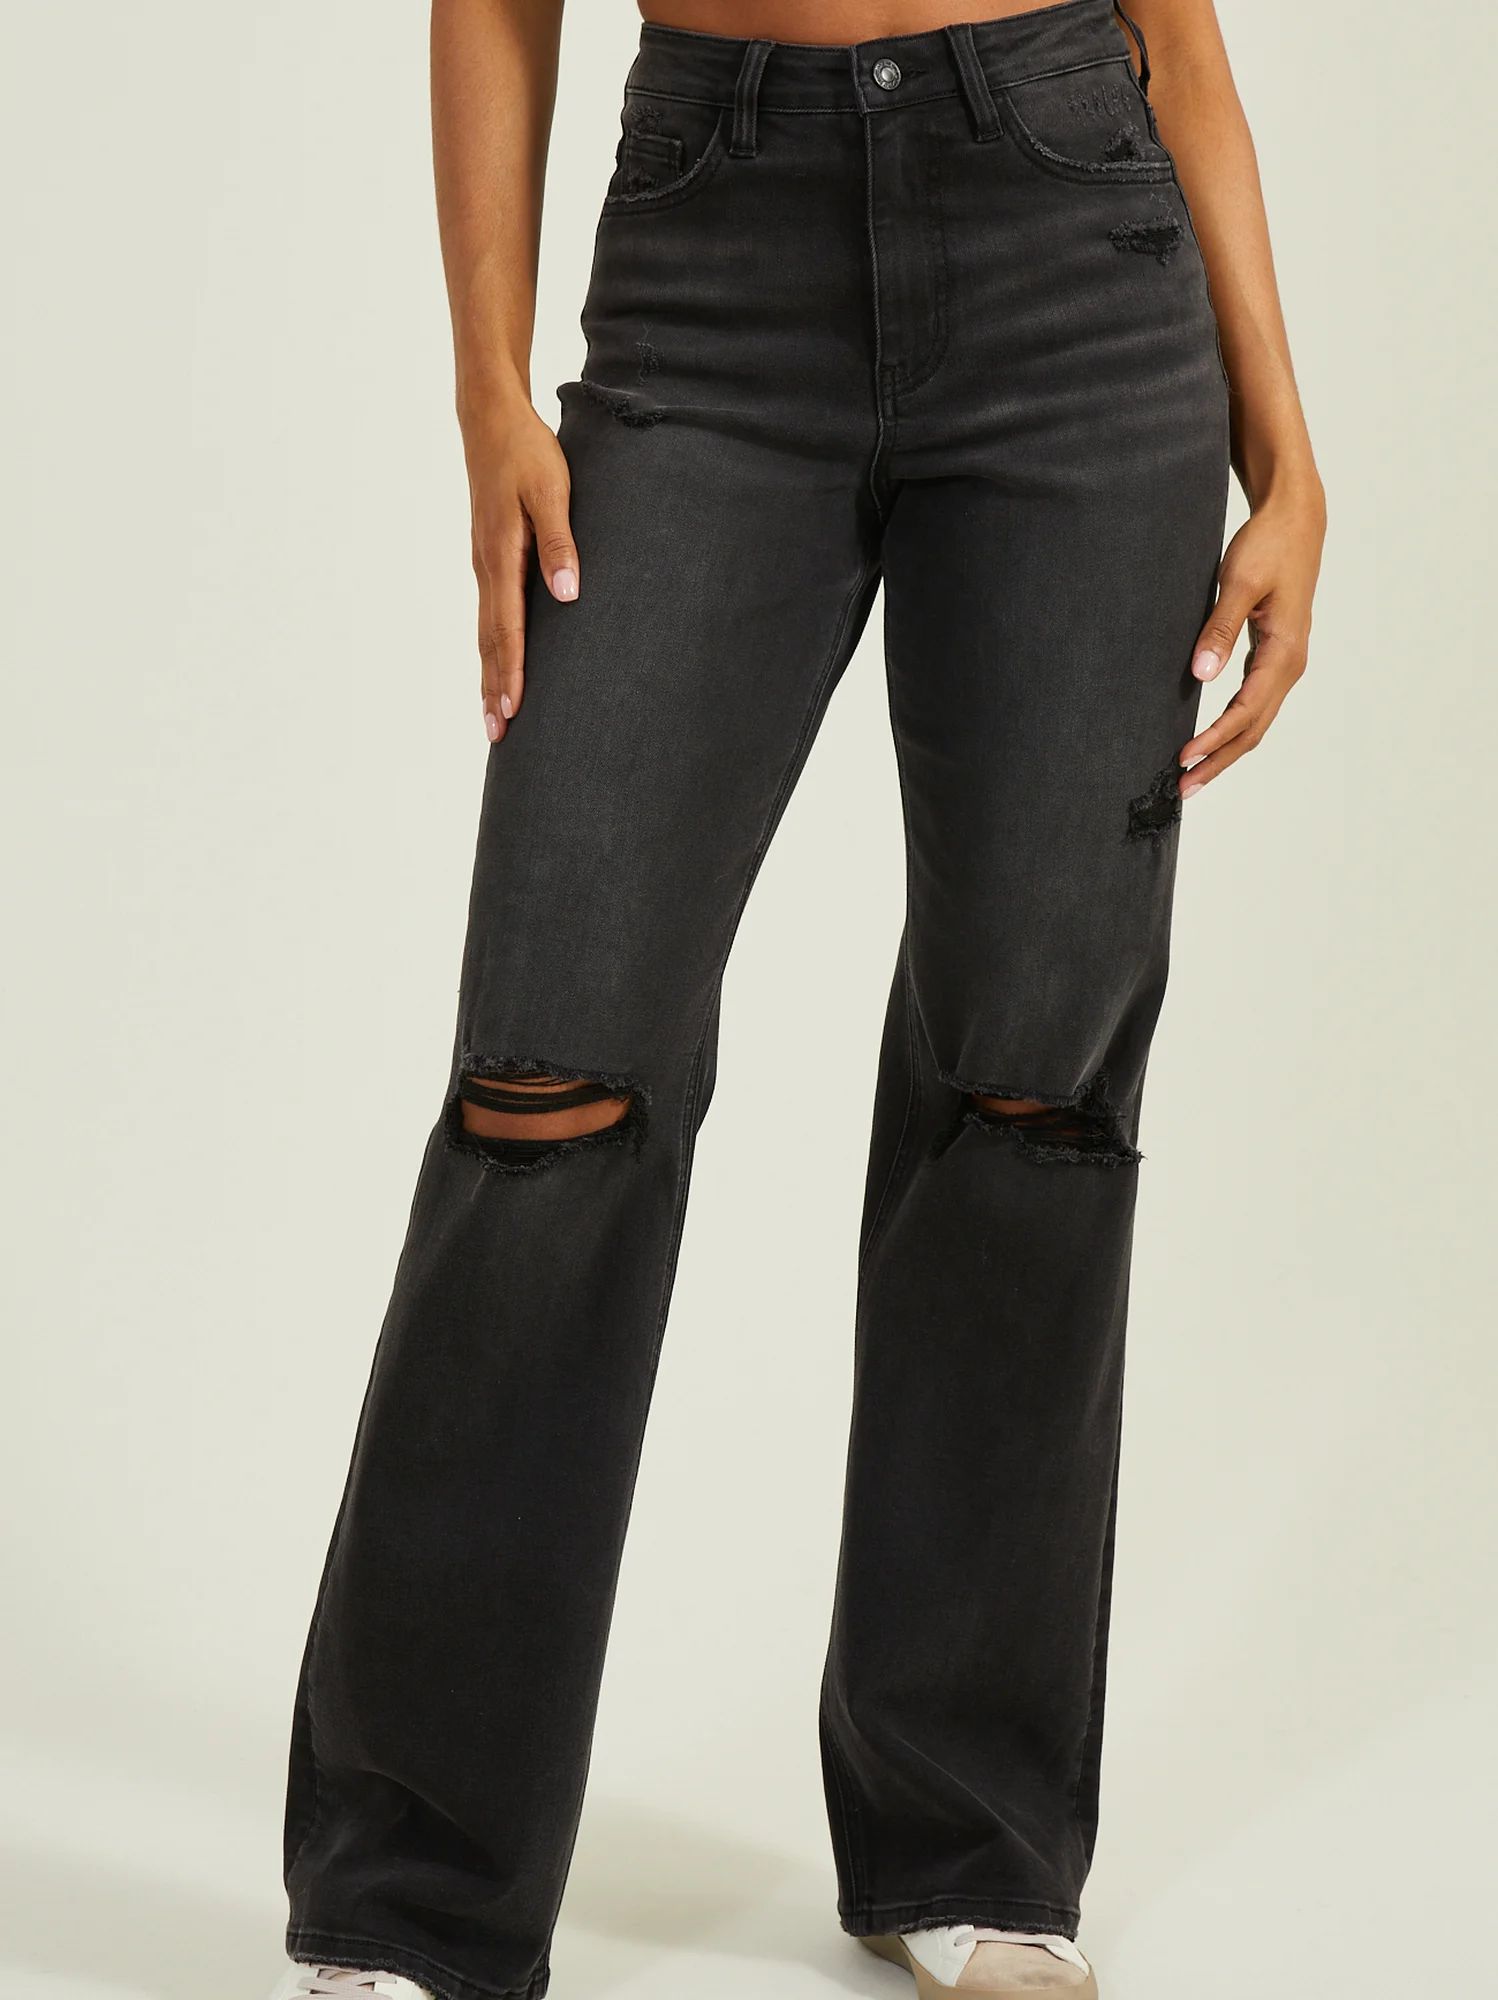 Hilary High Rise Straight Jeans in Washed Black | Altar'd State | Altar'd State